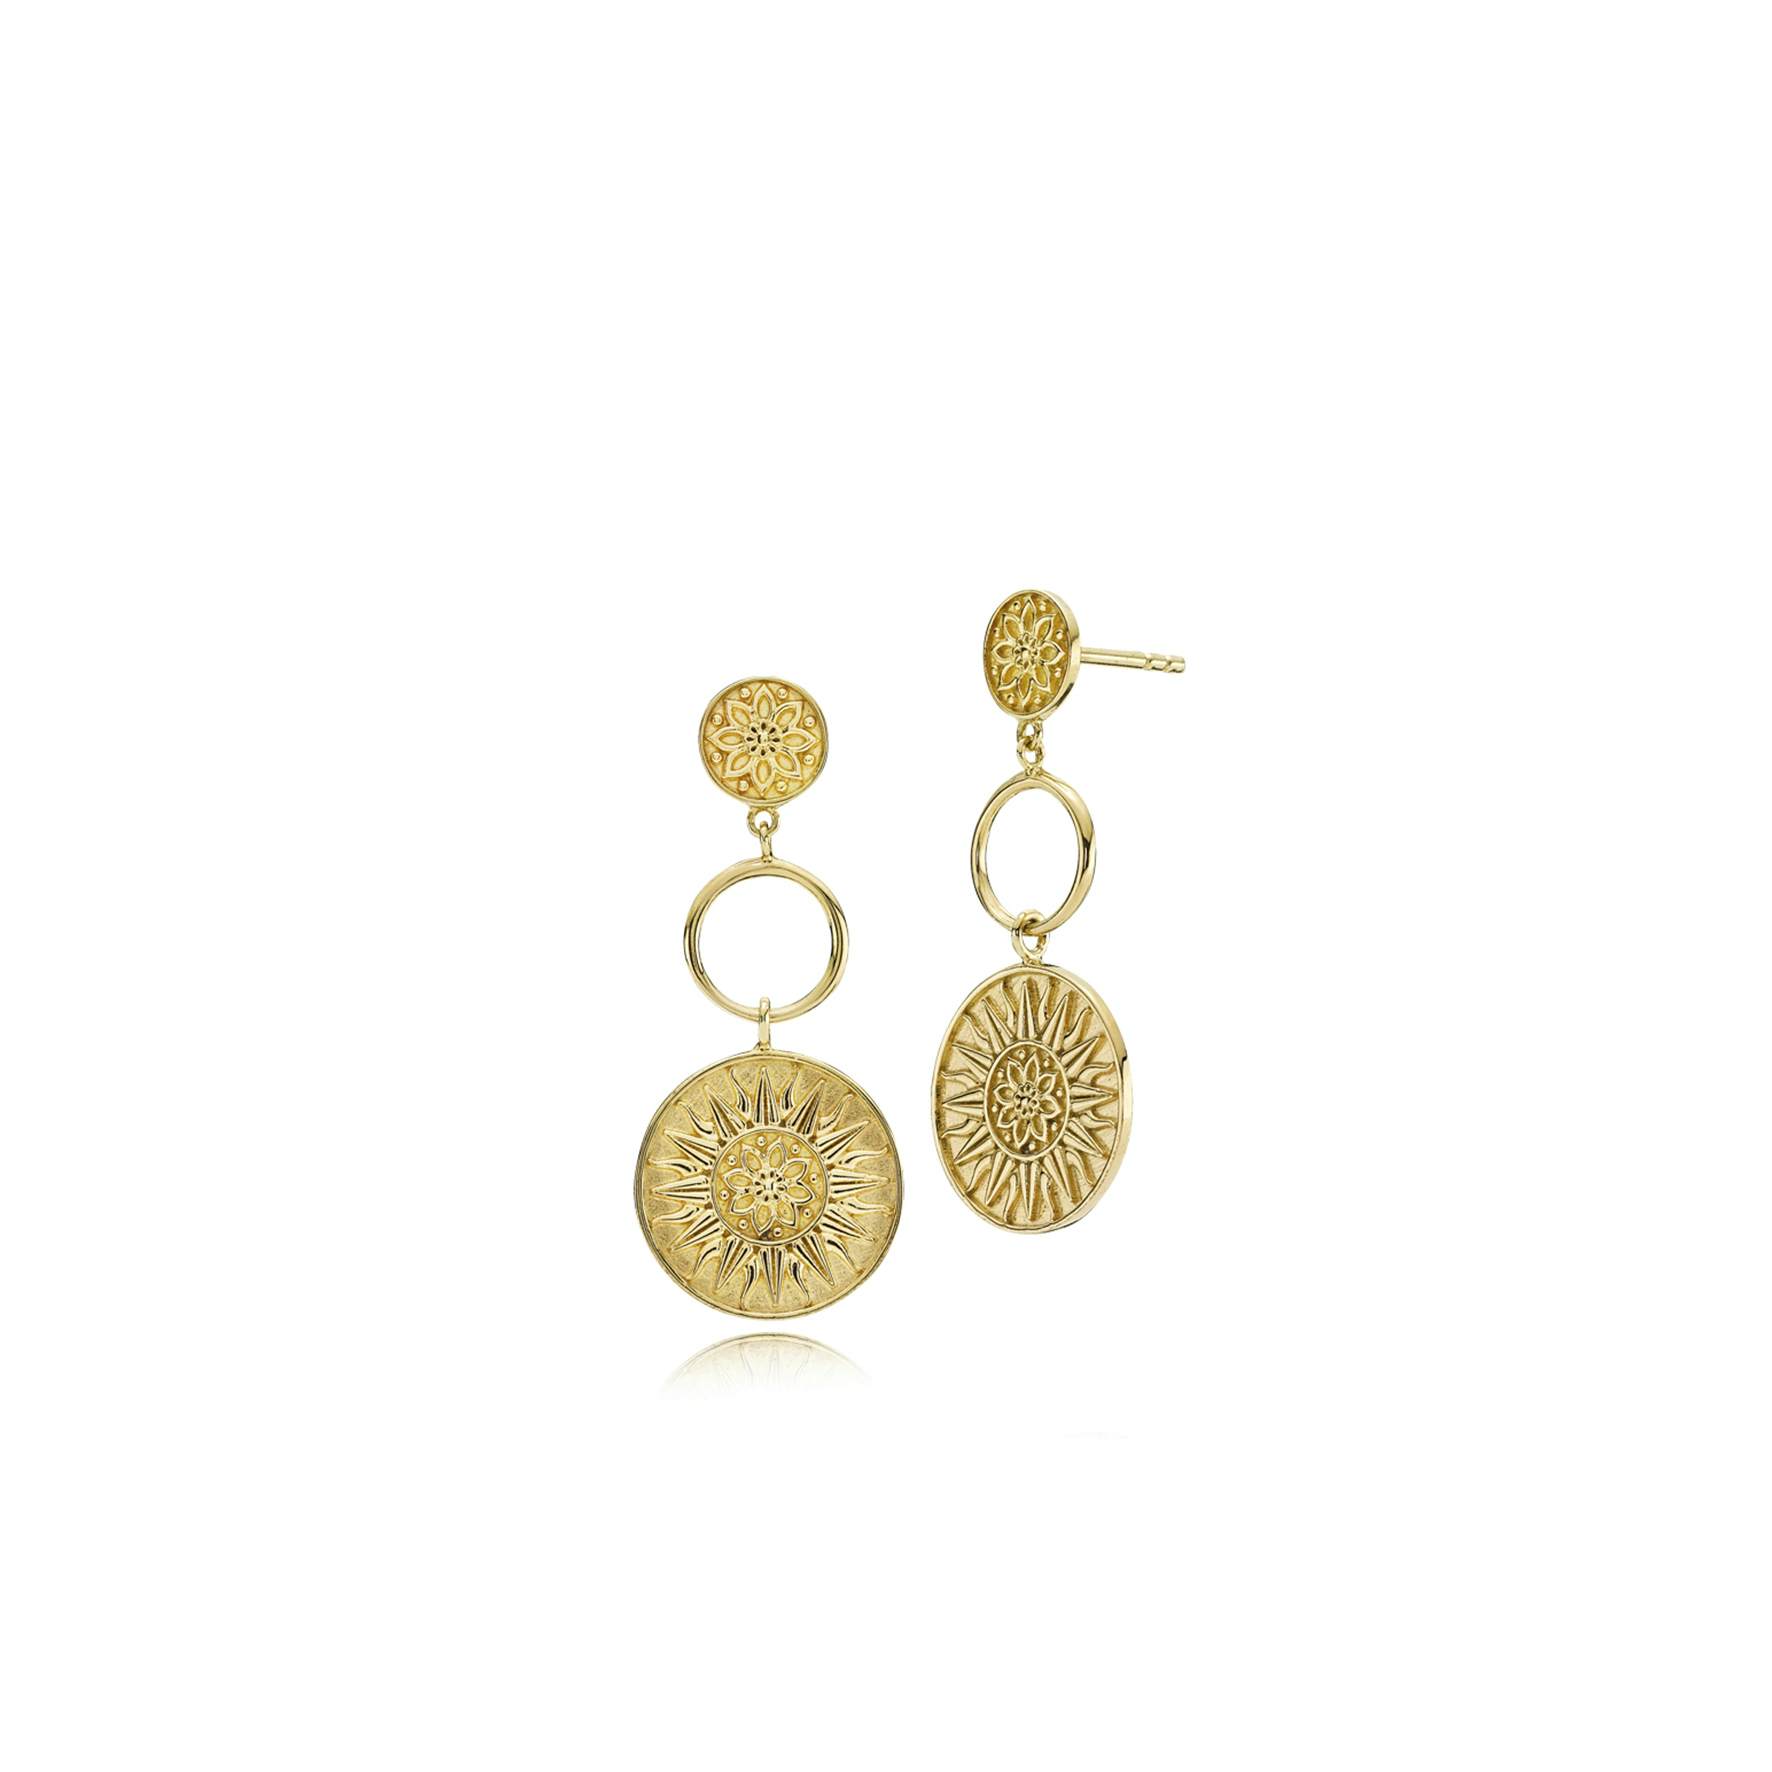 Frida Earrings from Izabel Camille in Goldplated-Silver Sterling 925